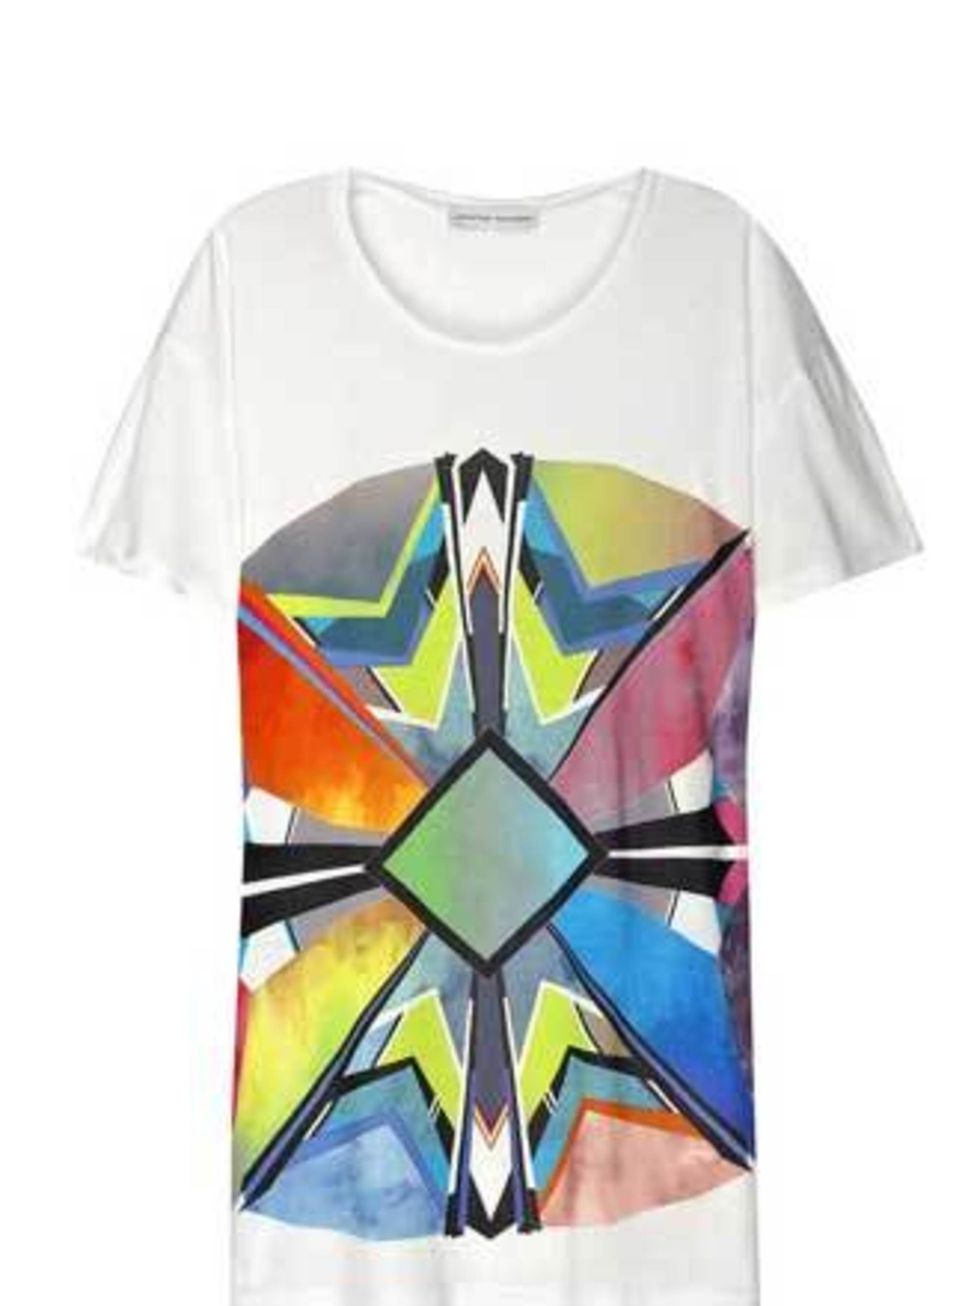 <p>Brighten up your wardrobe palette of grey, black and navy with this brighter-than-bright oversize tee.</p><p>Oversize T-Shirt, £185 by Jonathan Saunders at <a href="http://www.net-a-porter.com/product/63167">Net-a-Porter</a></p>